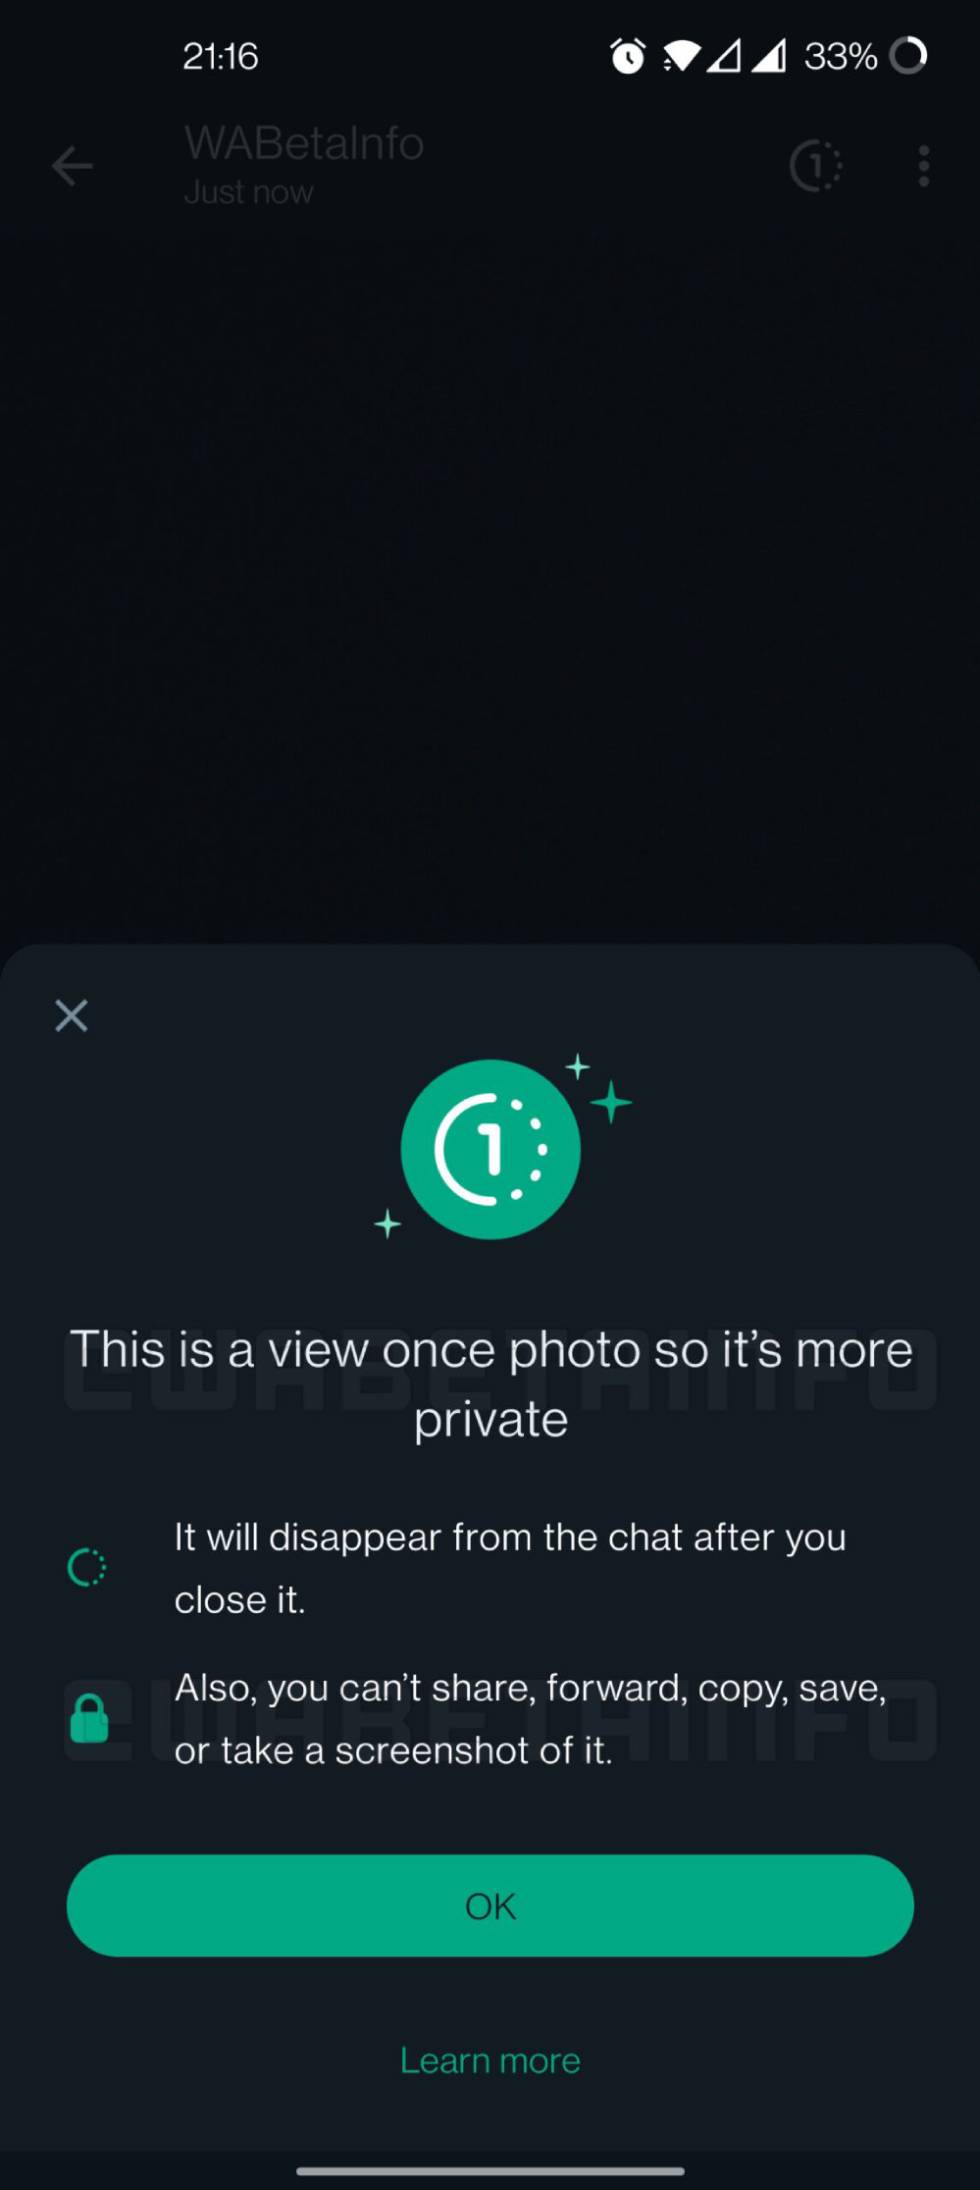 Blocking actions related to temporary content on WhatsApp